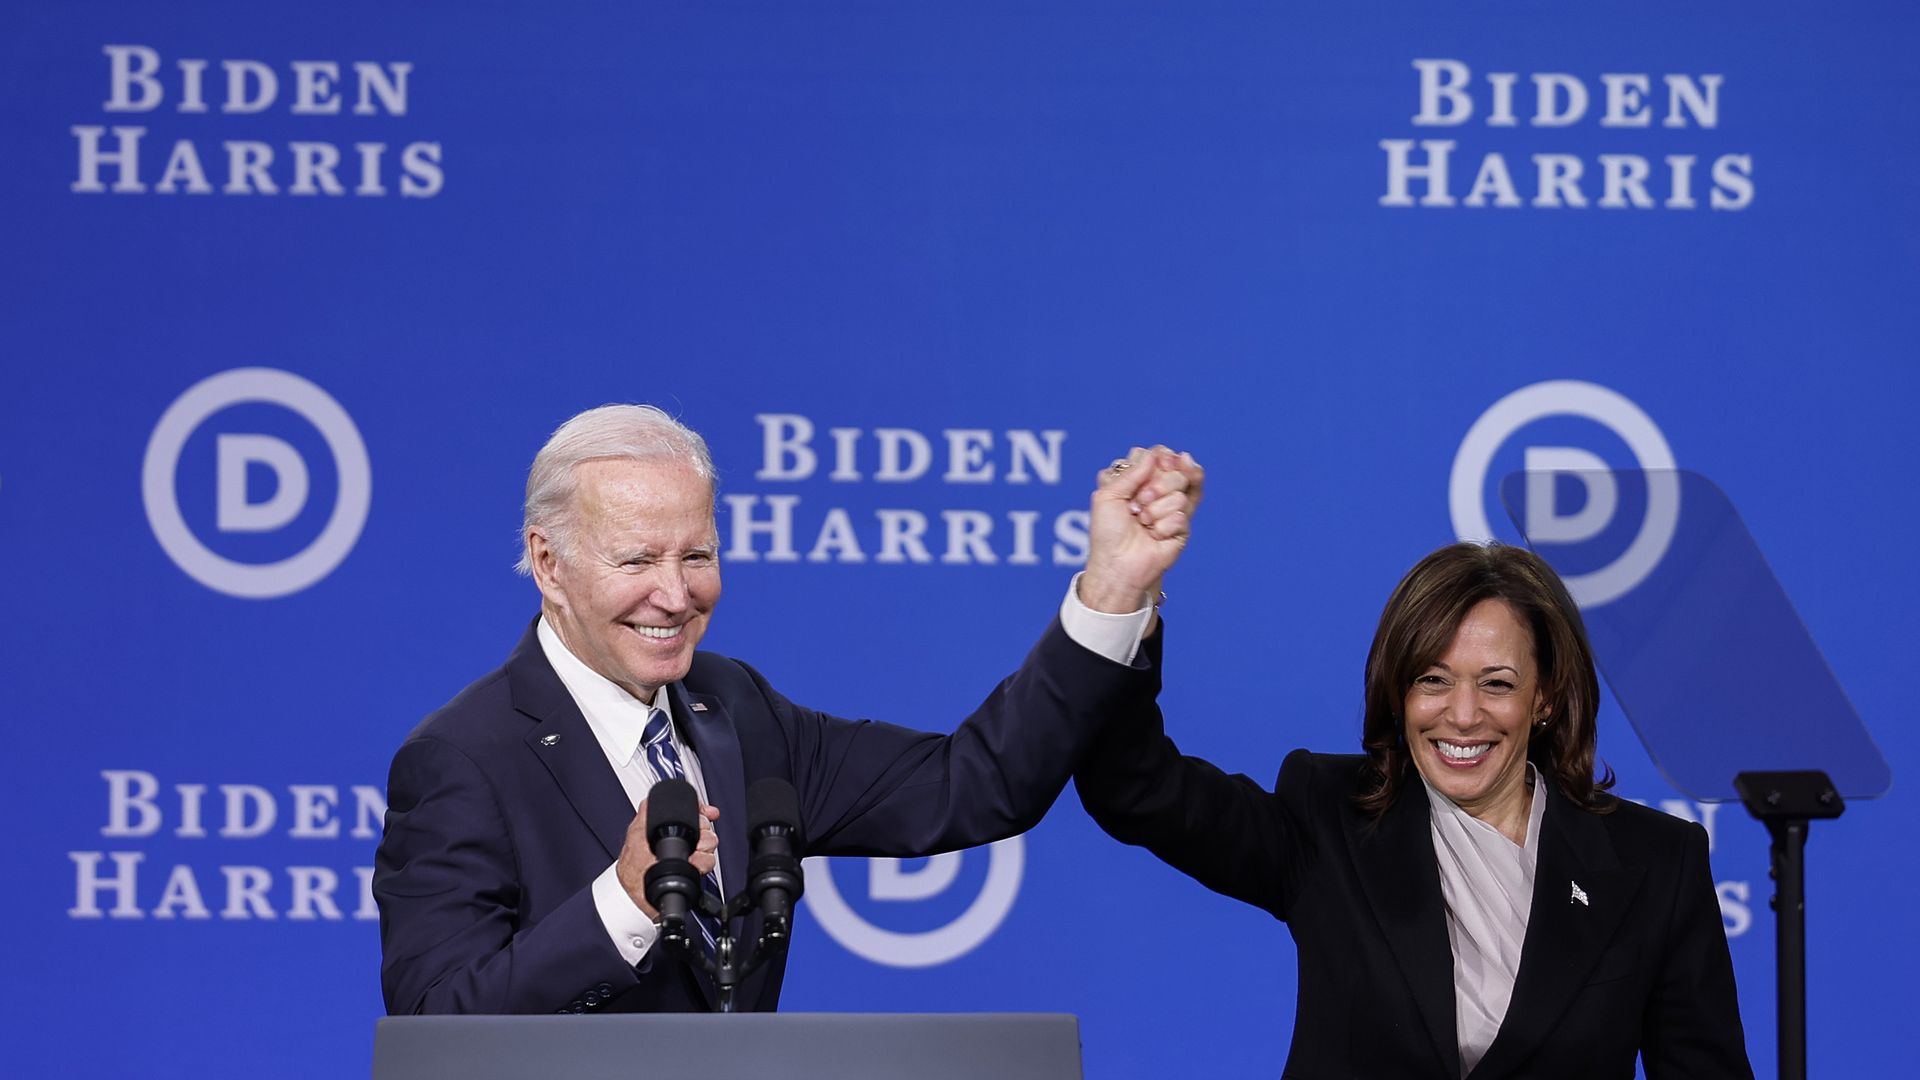 President Biden and Vice President Harris raise their clasped hands after speaking at a Democratic National Committee meeting on Feb. 3, 2023, in Philadelphia.